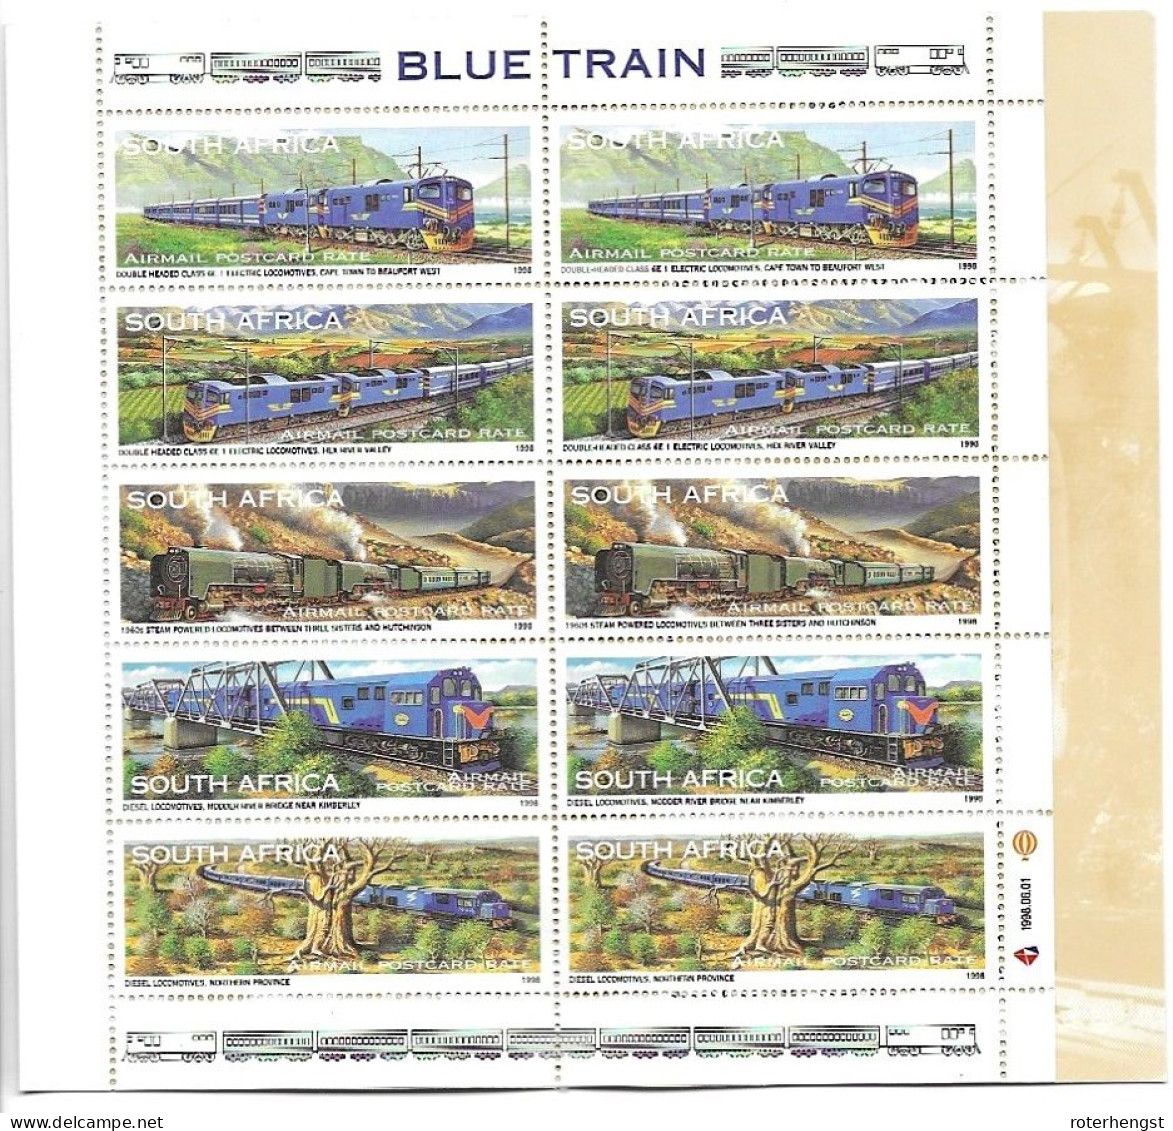 South Africa Train Booklet Mnh ** 1998 14 Euros - Booklets